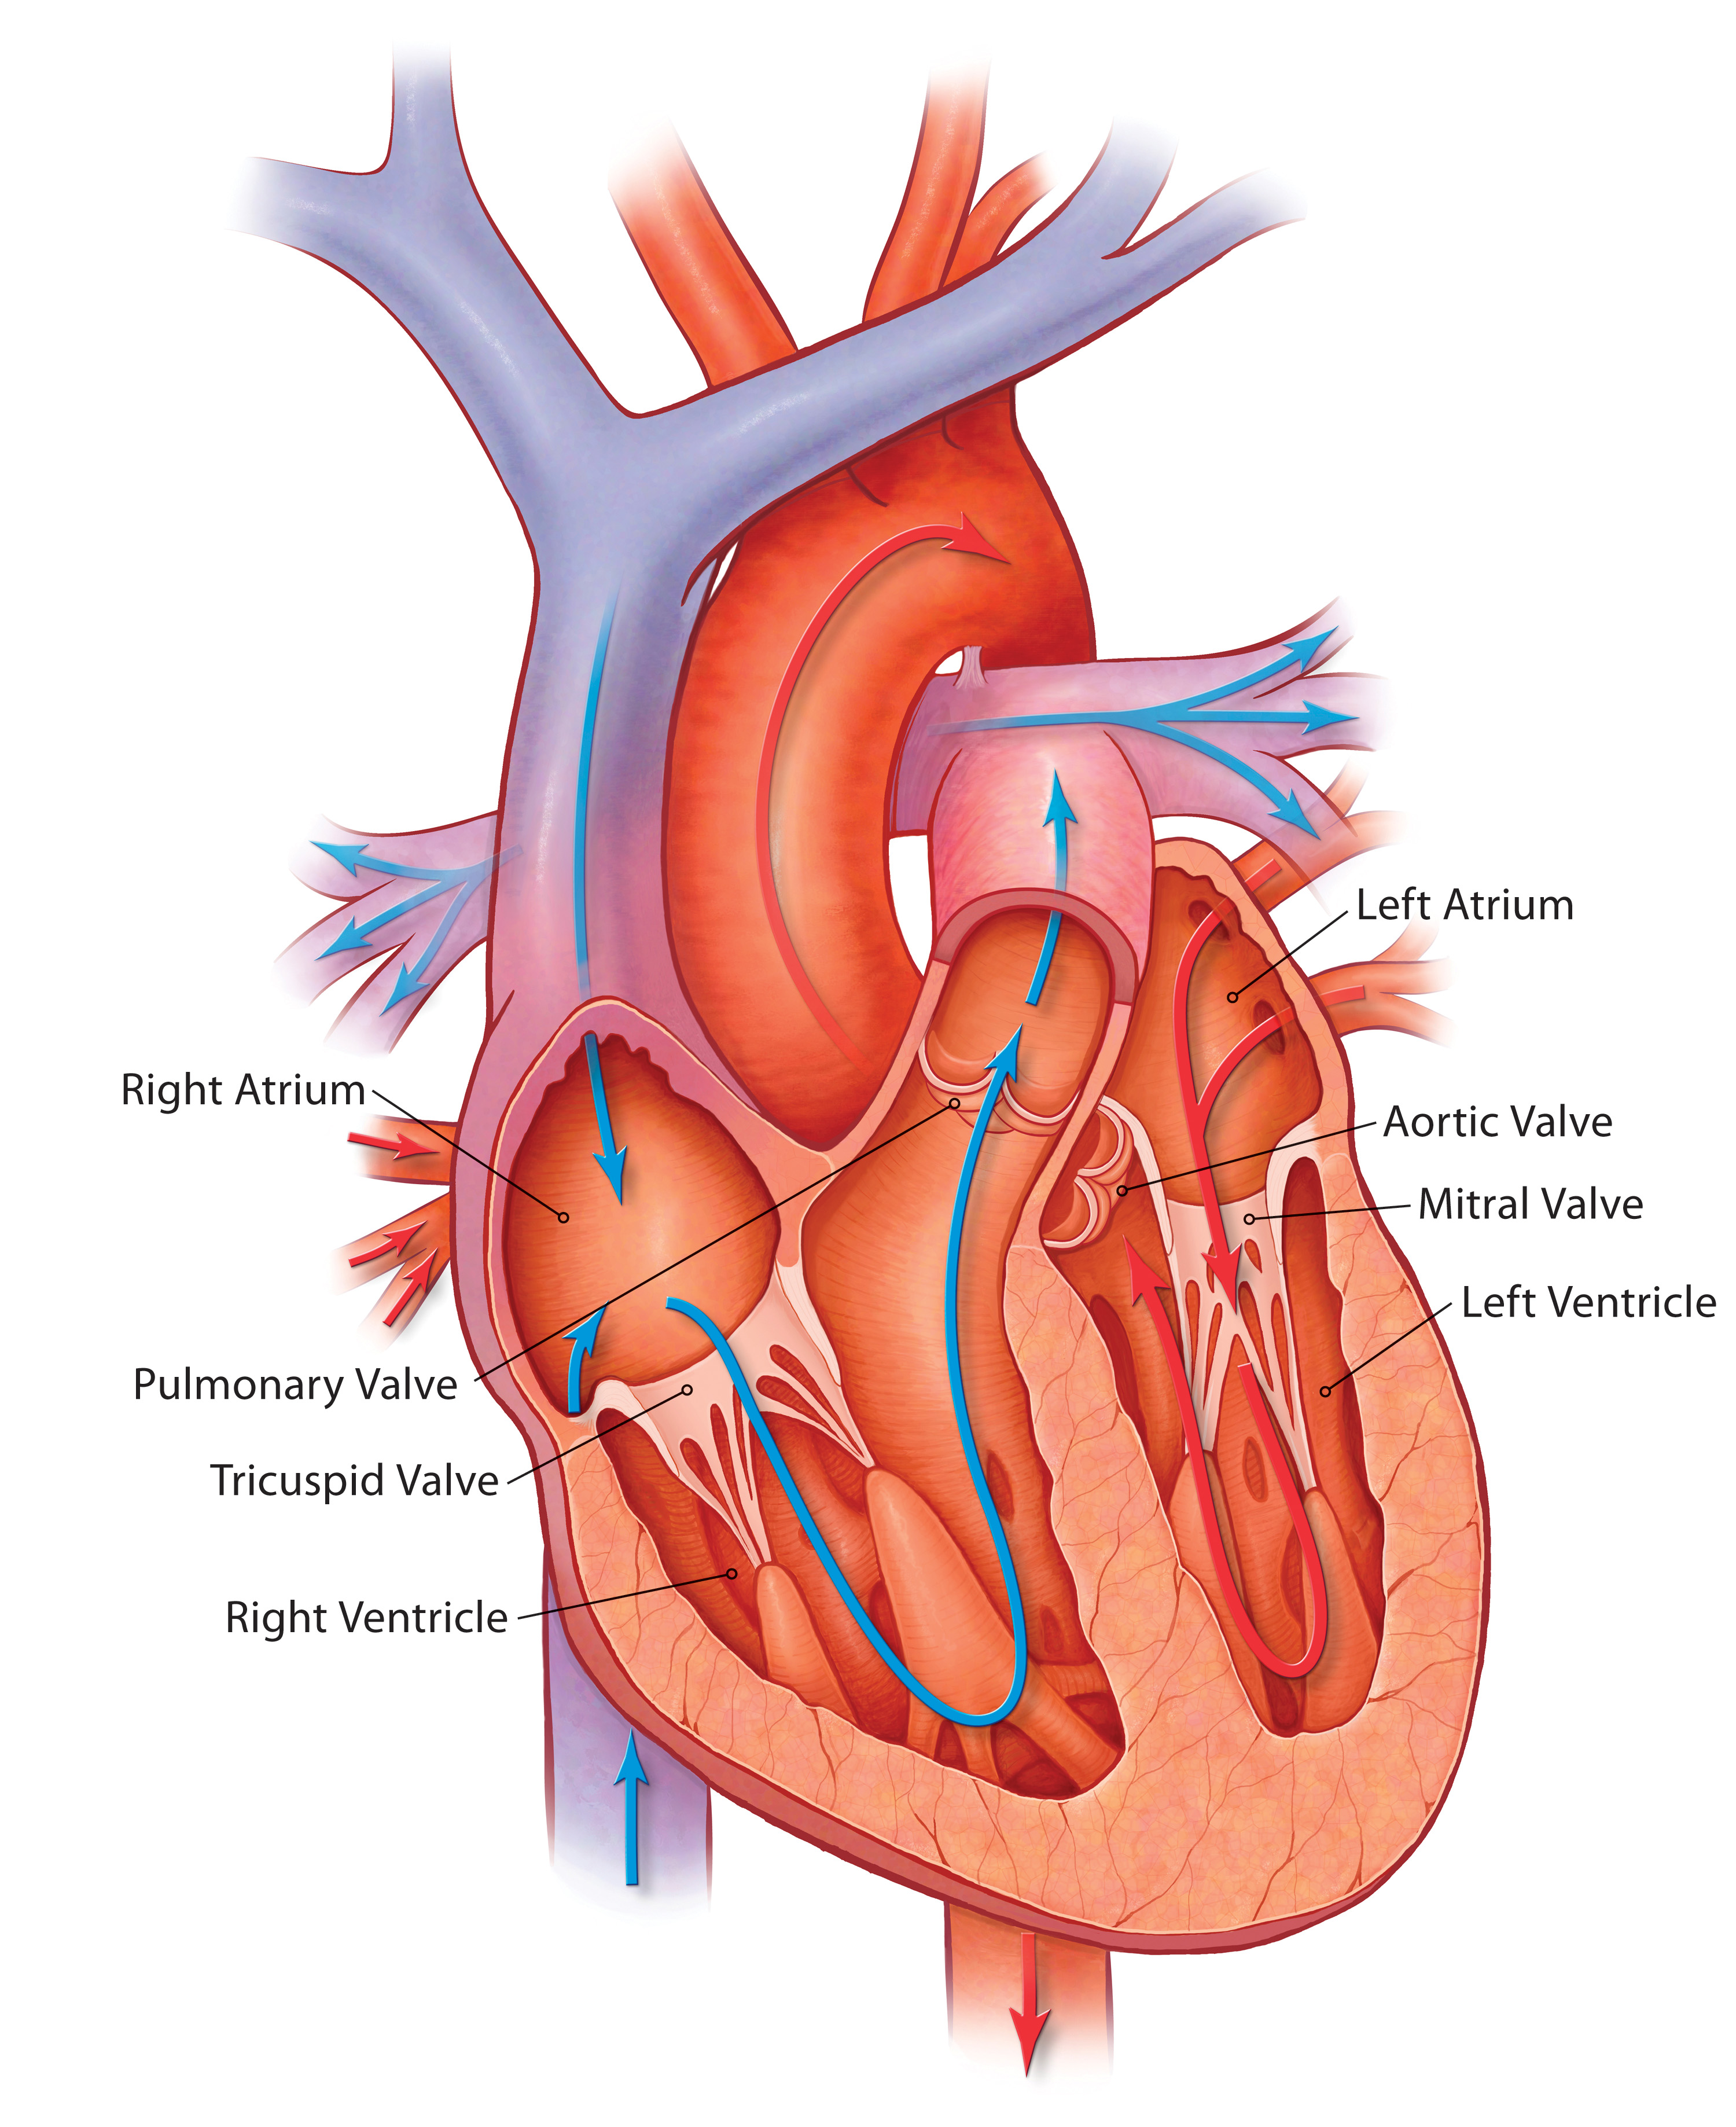 image-gallery-labeled-heart-valves-diagram